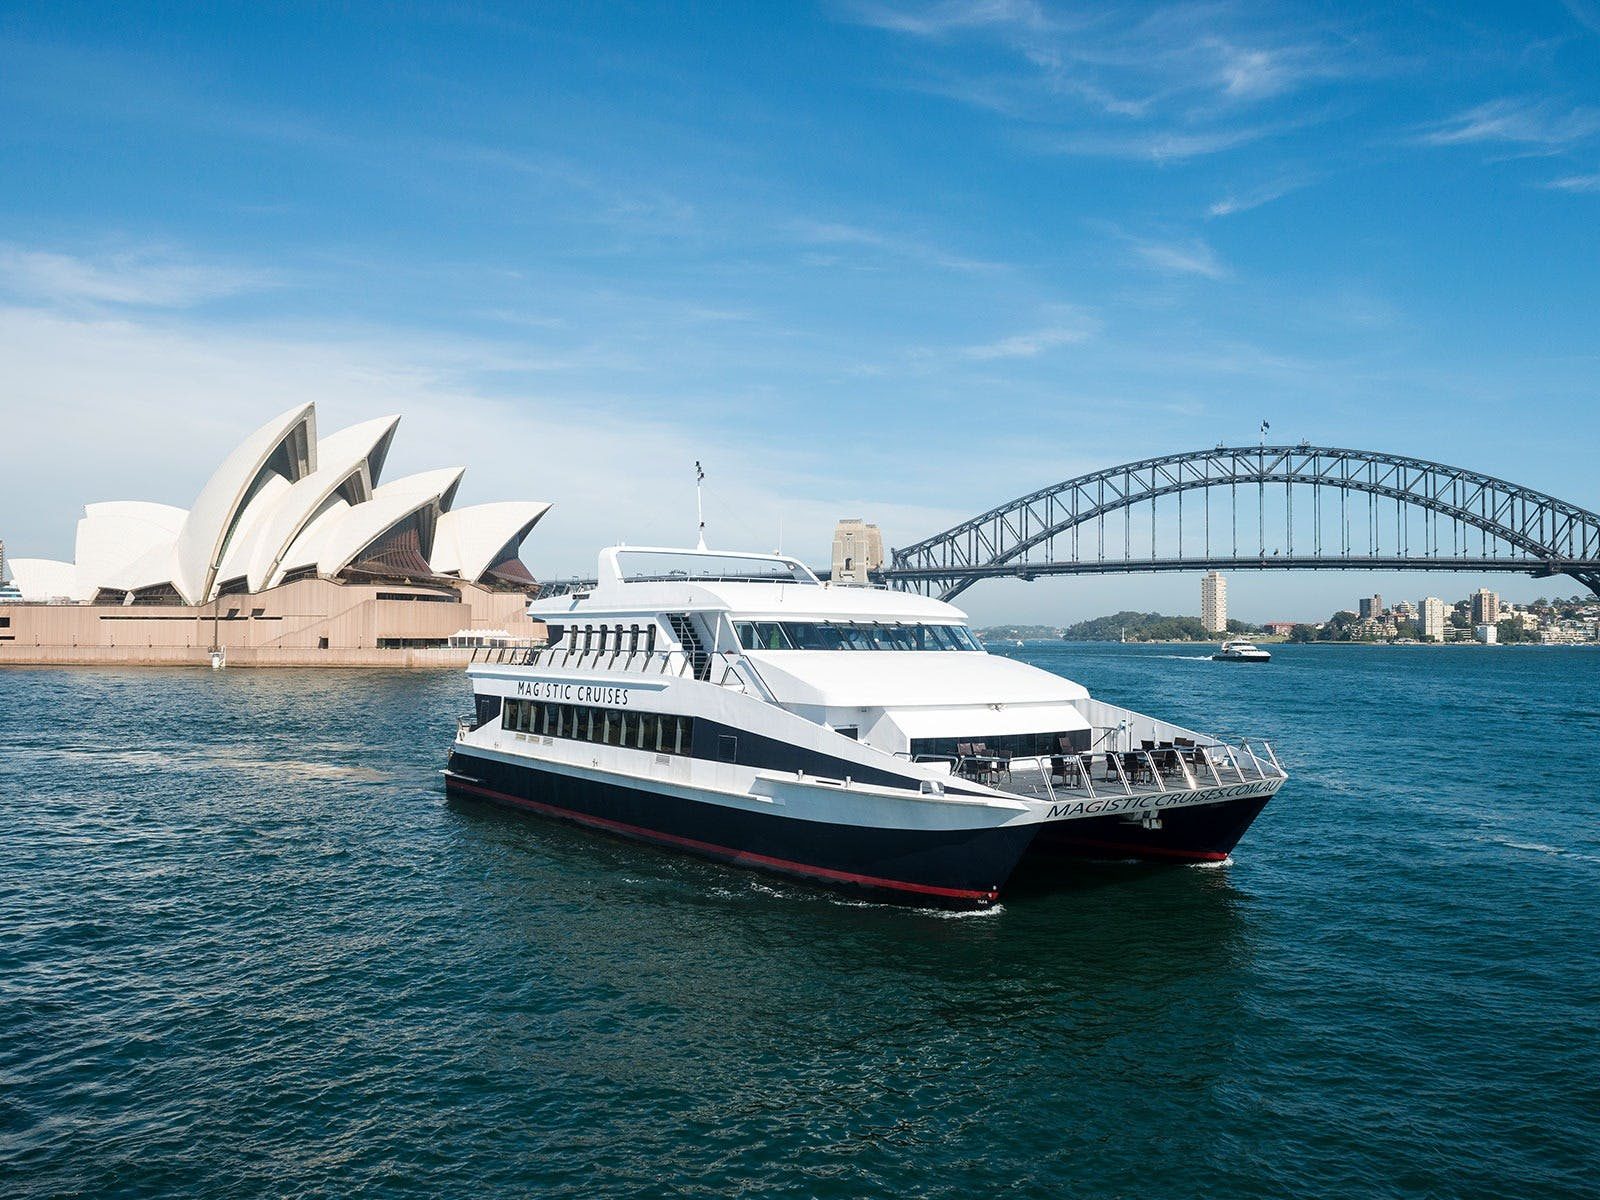 Magistic vessel on Sydney harbour with opera house and harbour bridge in the background.